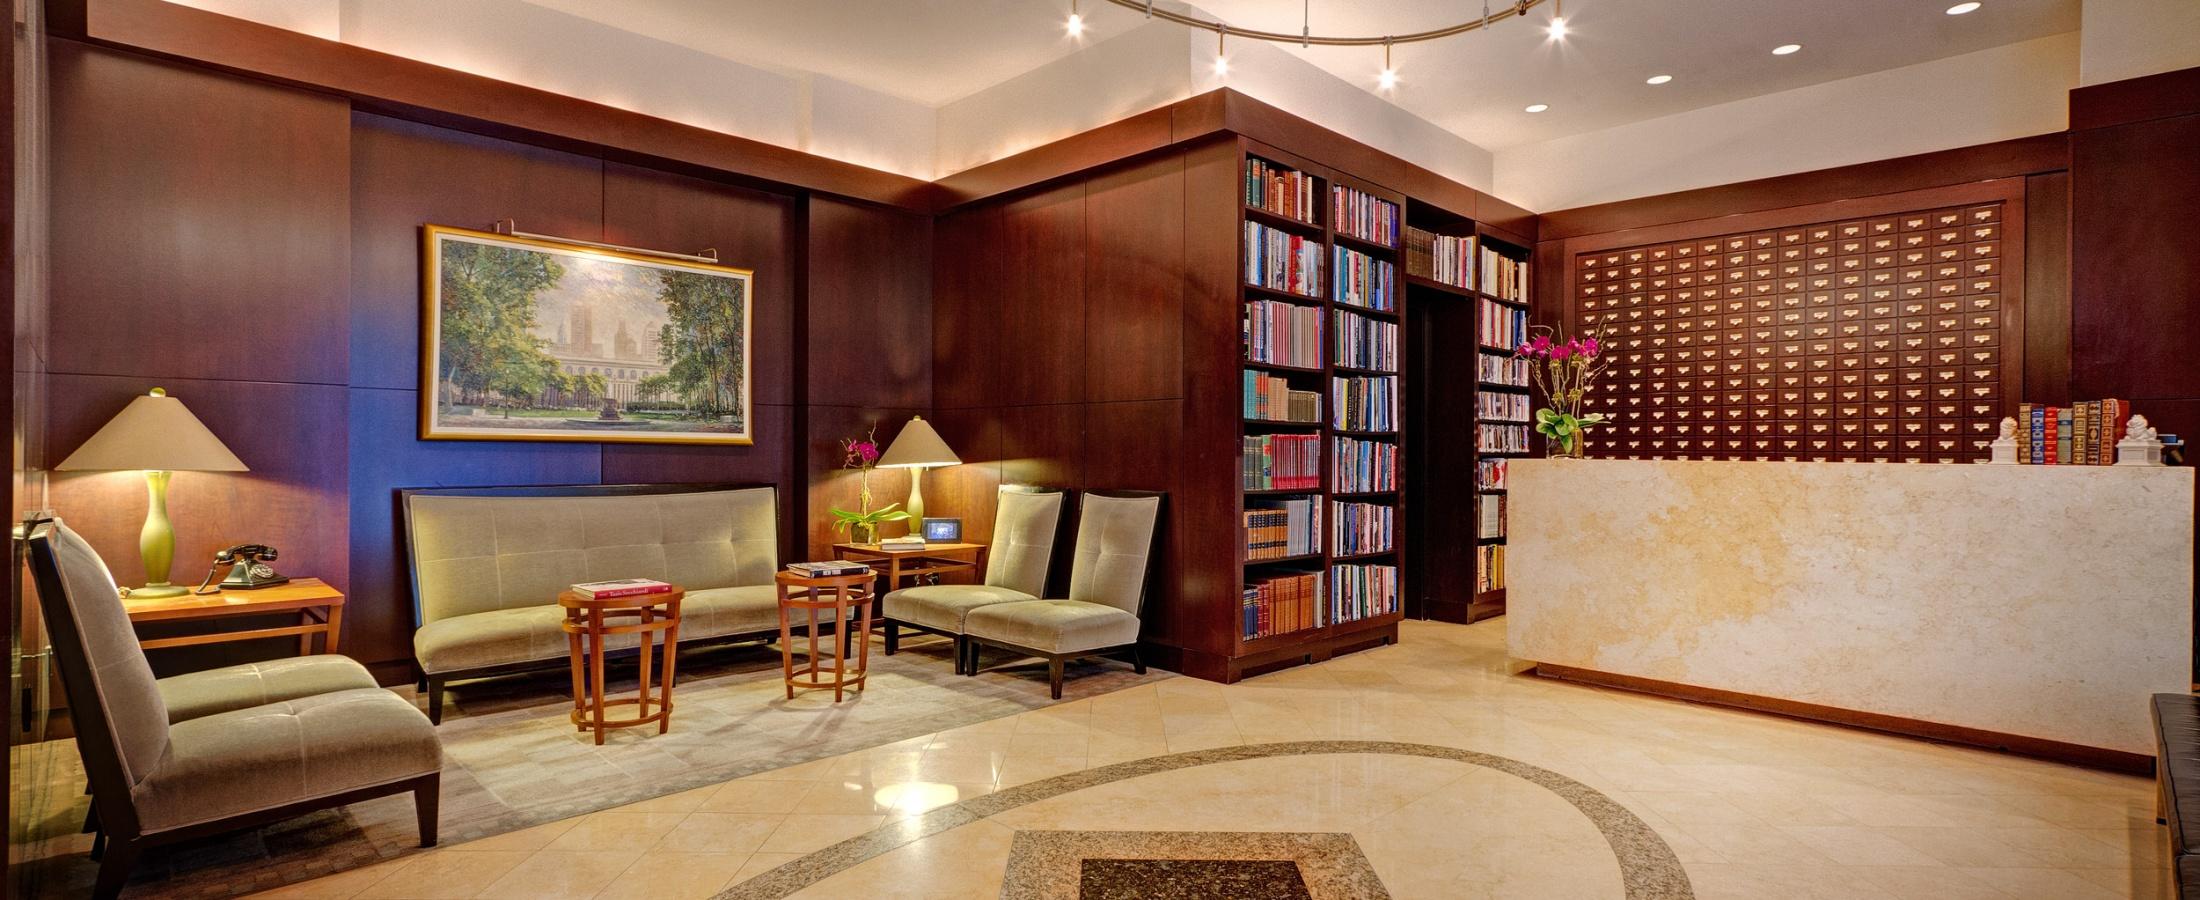 The Library Hotel is home to over 6,000 books throughout our entire hotel and you will find a quarter of them in our hotel lobby.